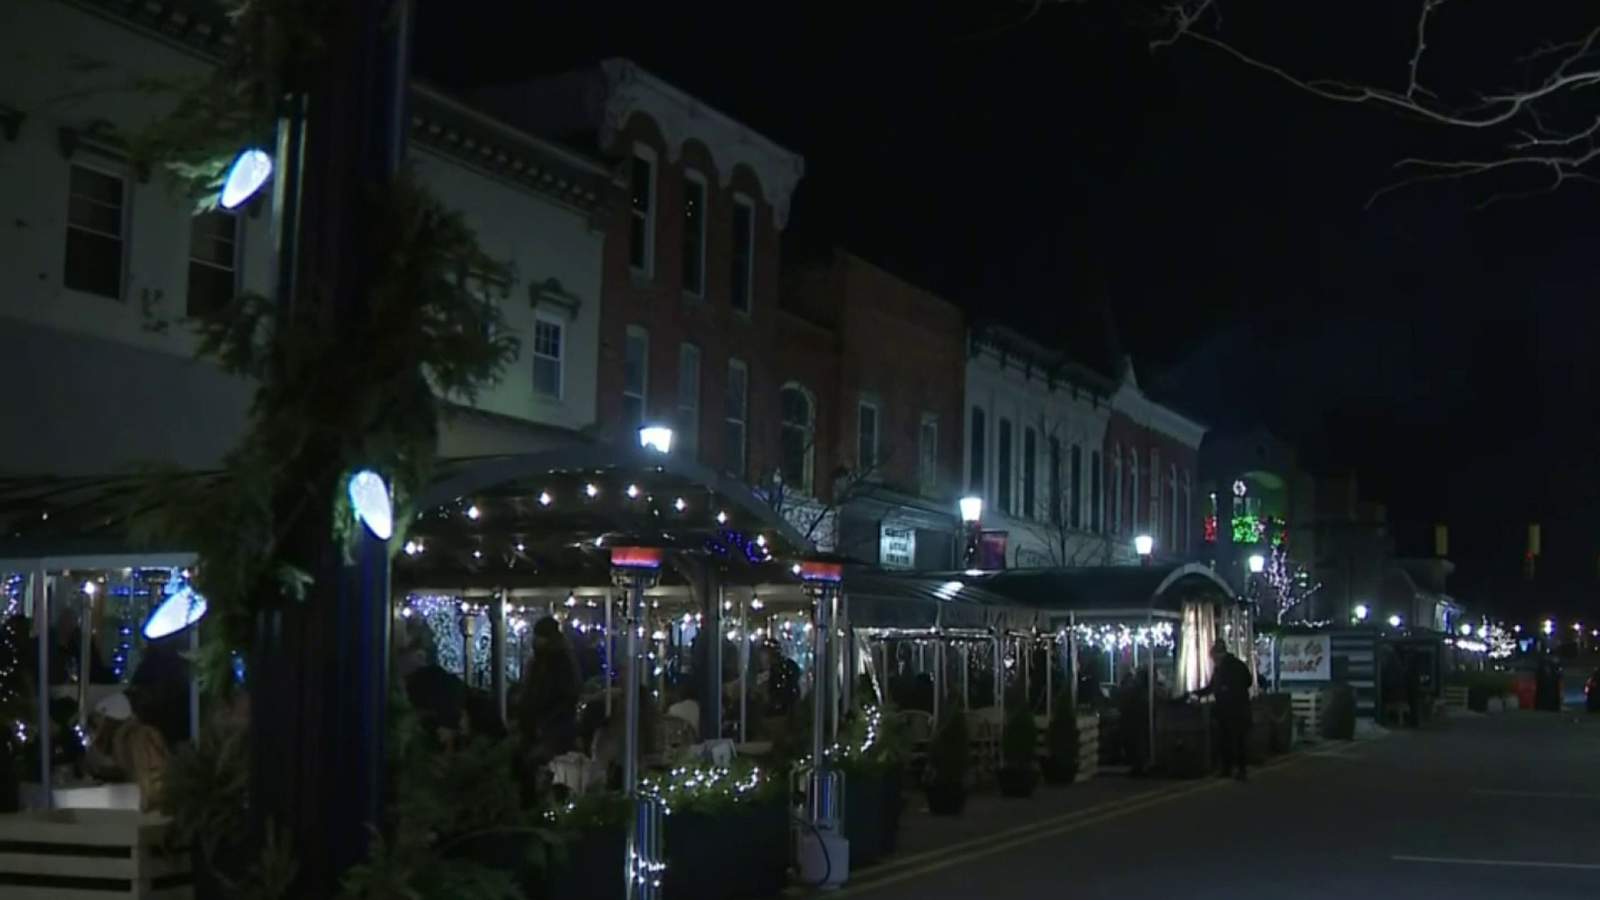 How people are celebrating New Year’s Eve in downtown Northville amid COVID restrictions